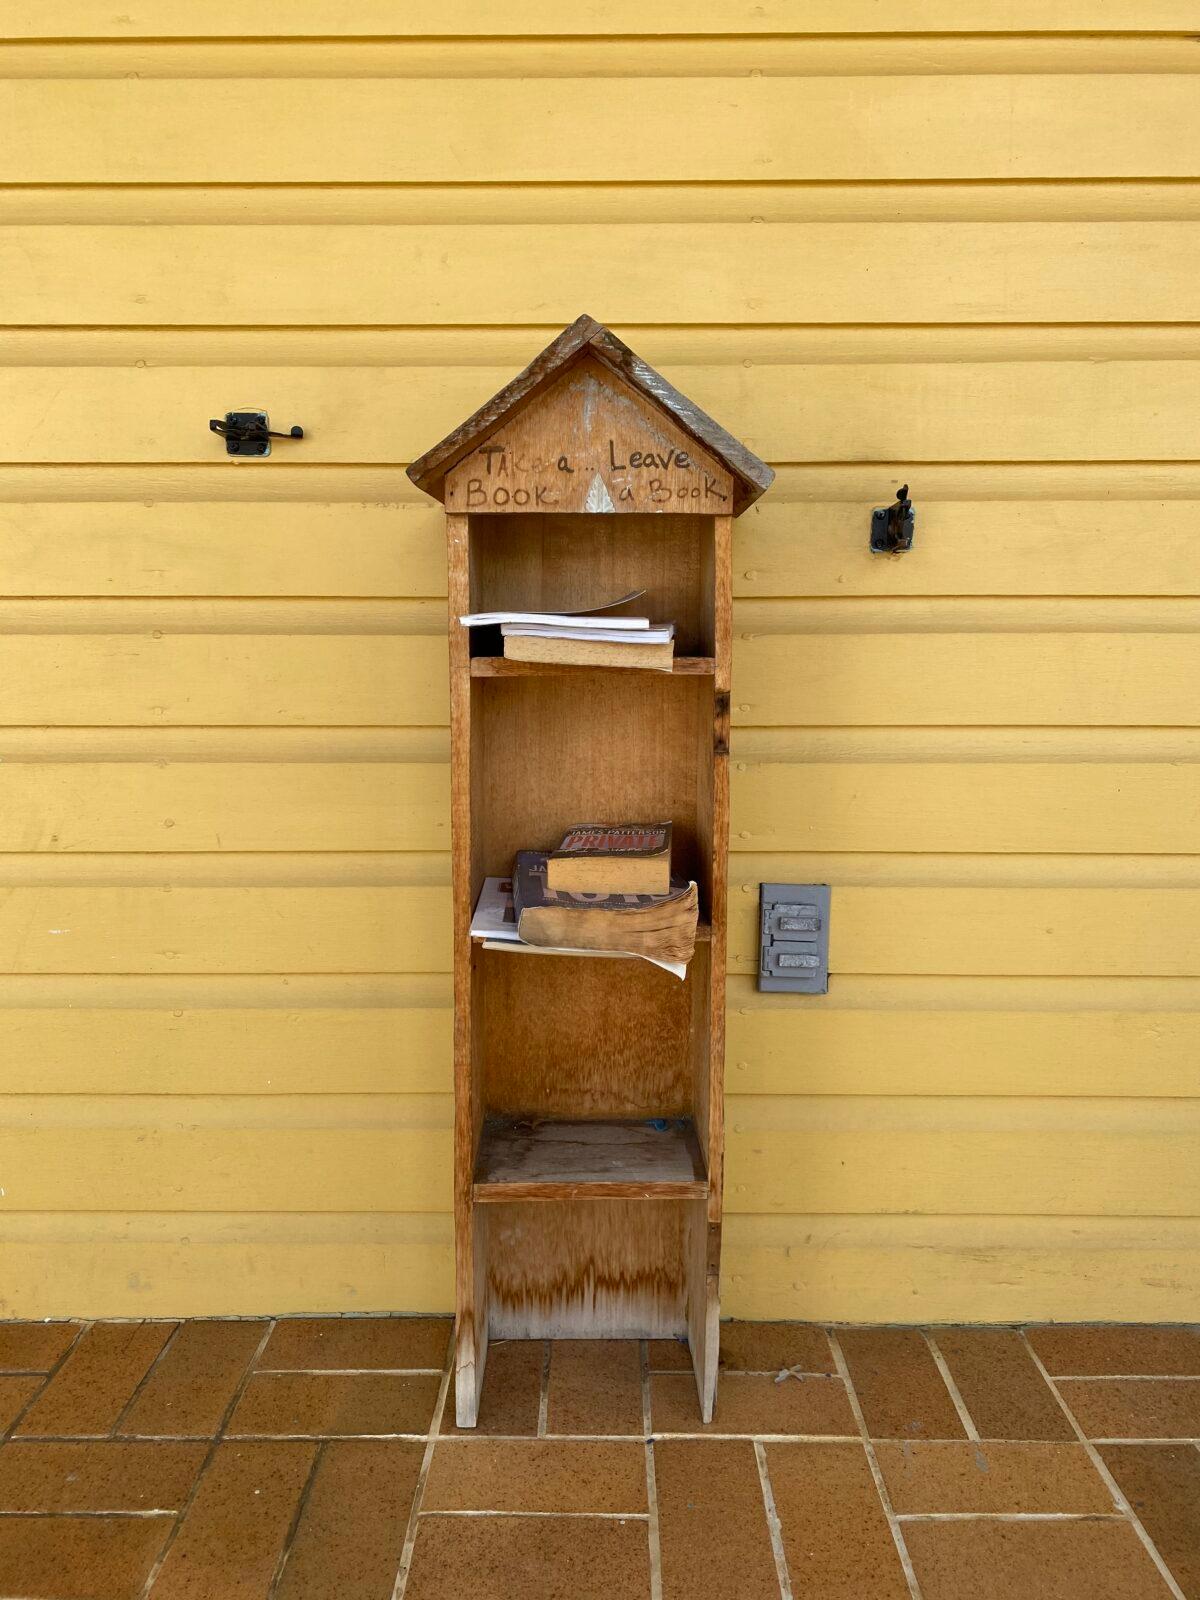 A little free library found on the streets of Frederiksted behind Polly's at the Pier, a popular restaurant. (Skye Sherman)